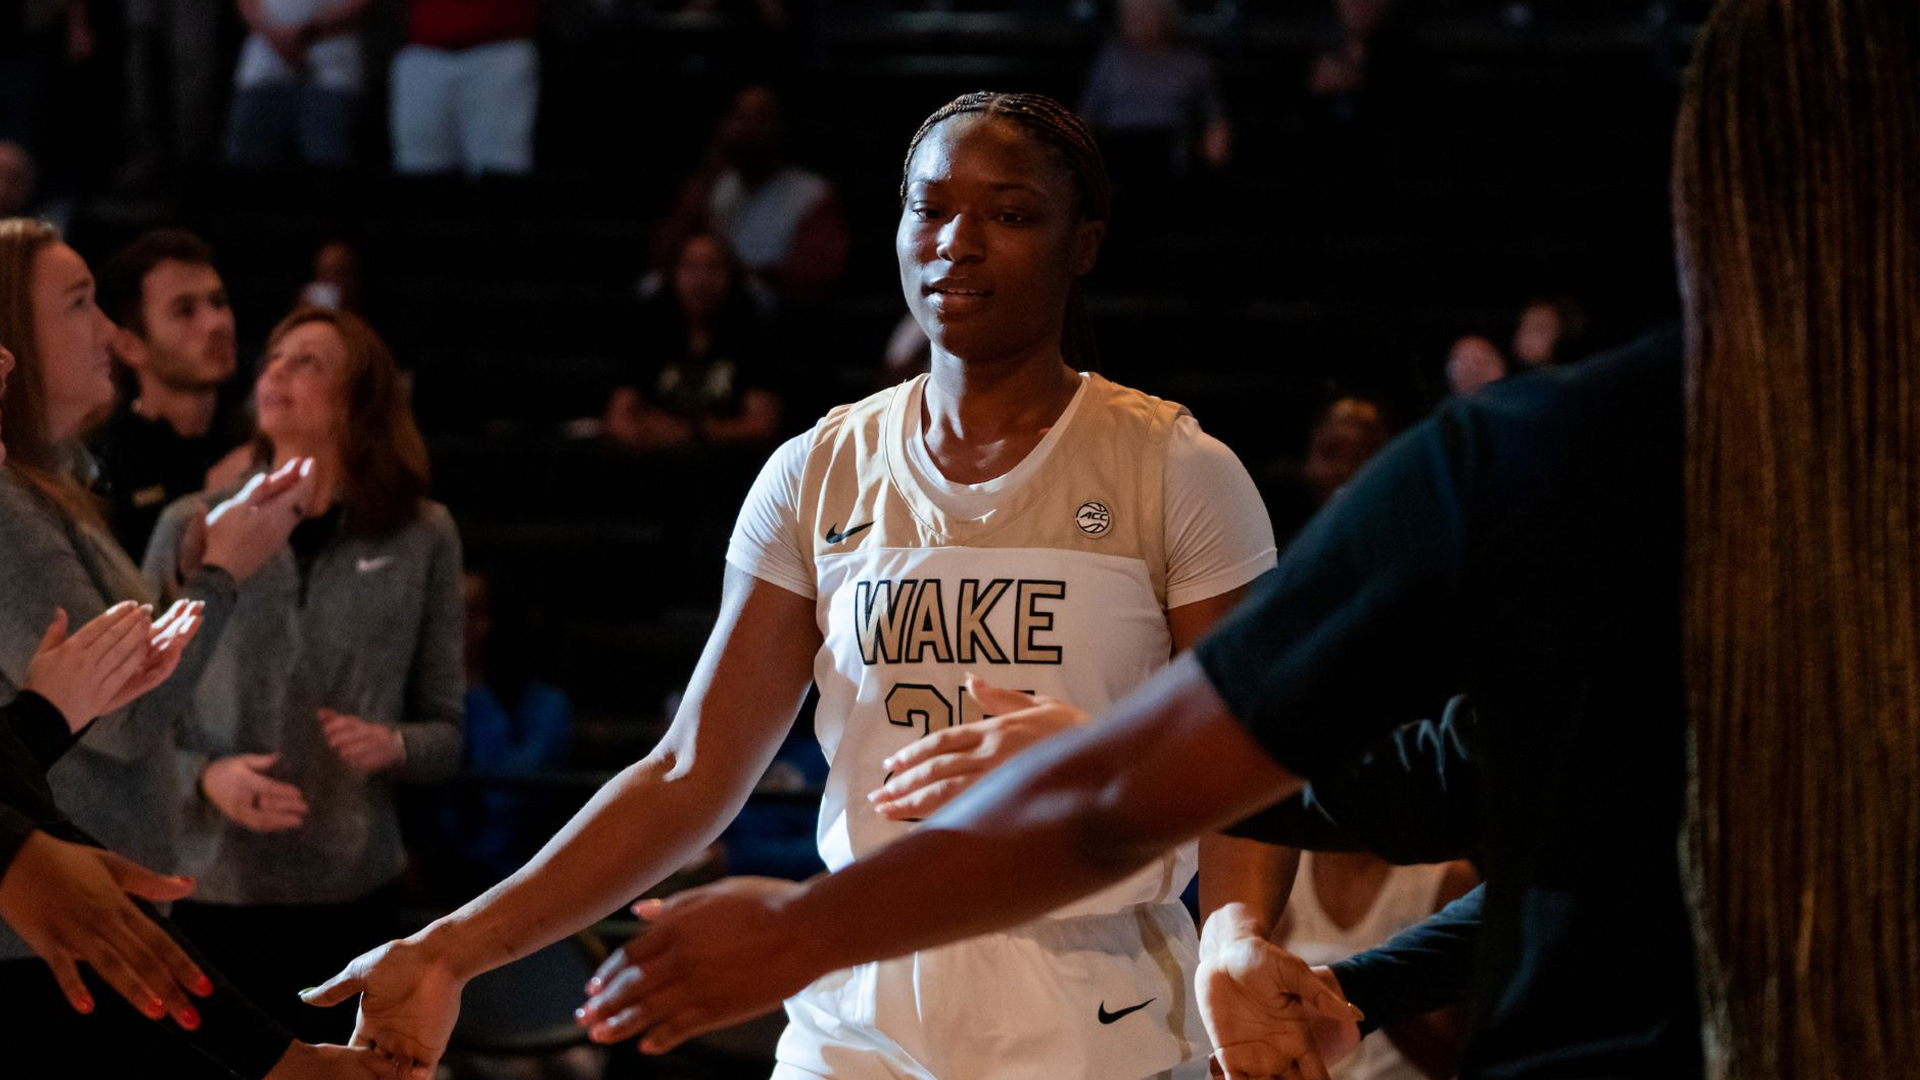 Wake Forest women's basketball player No. 25